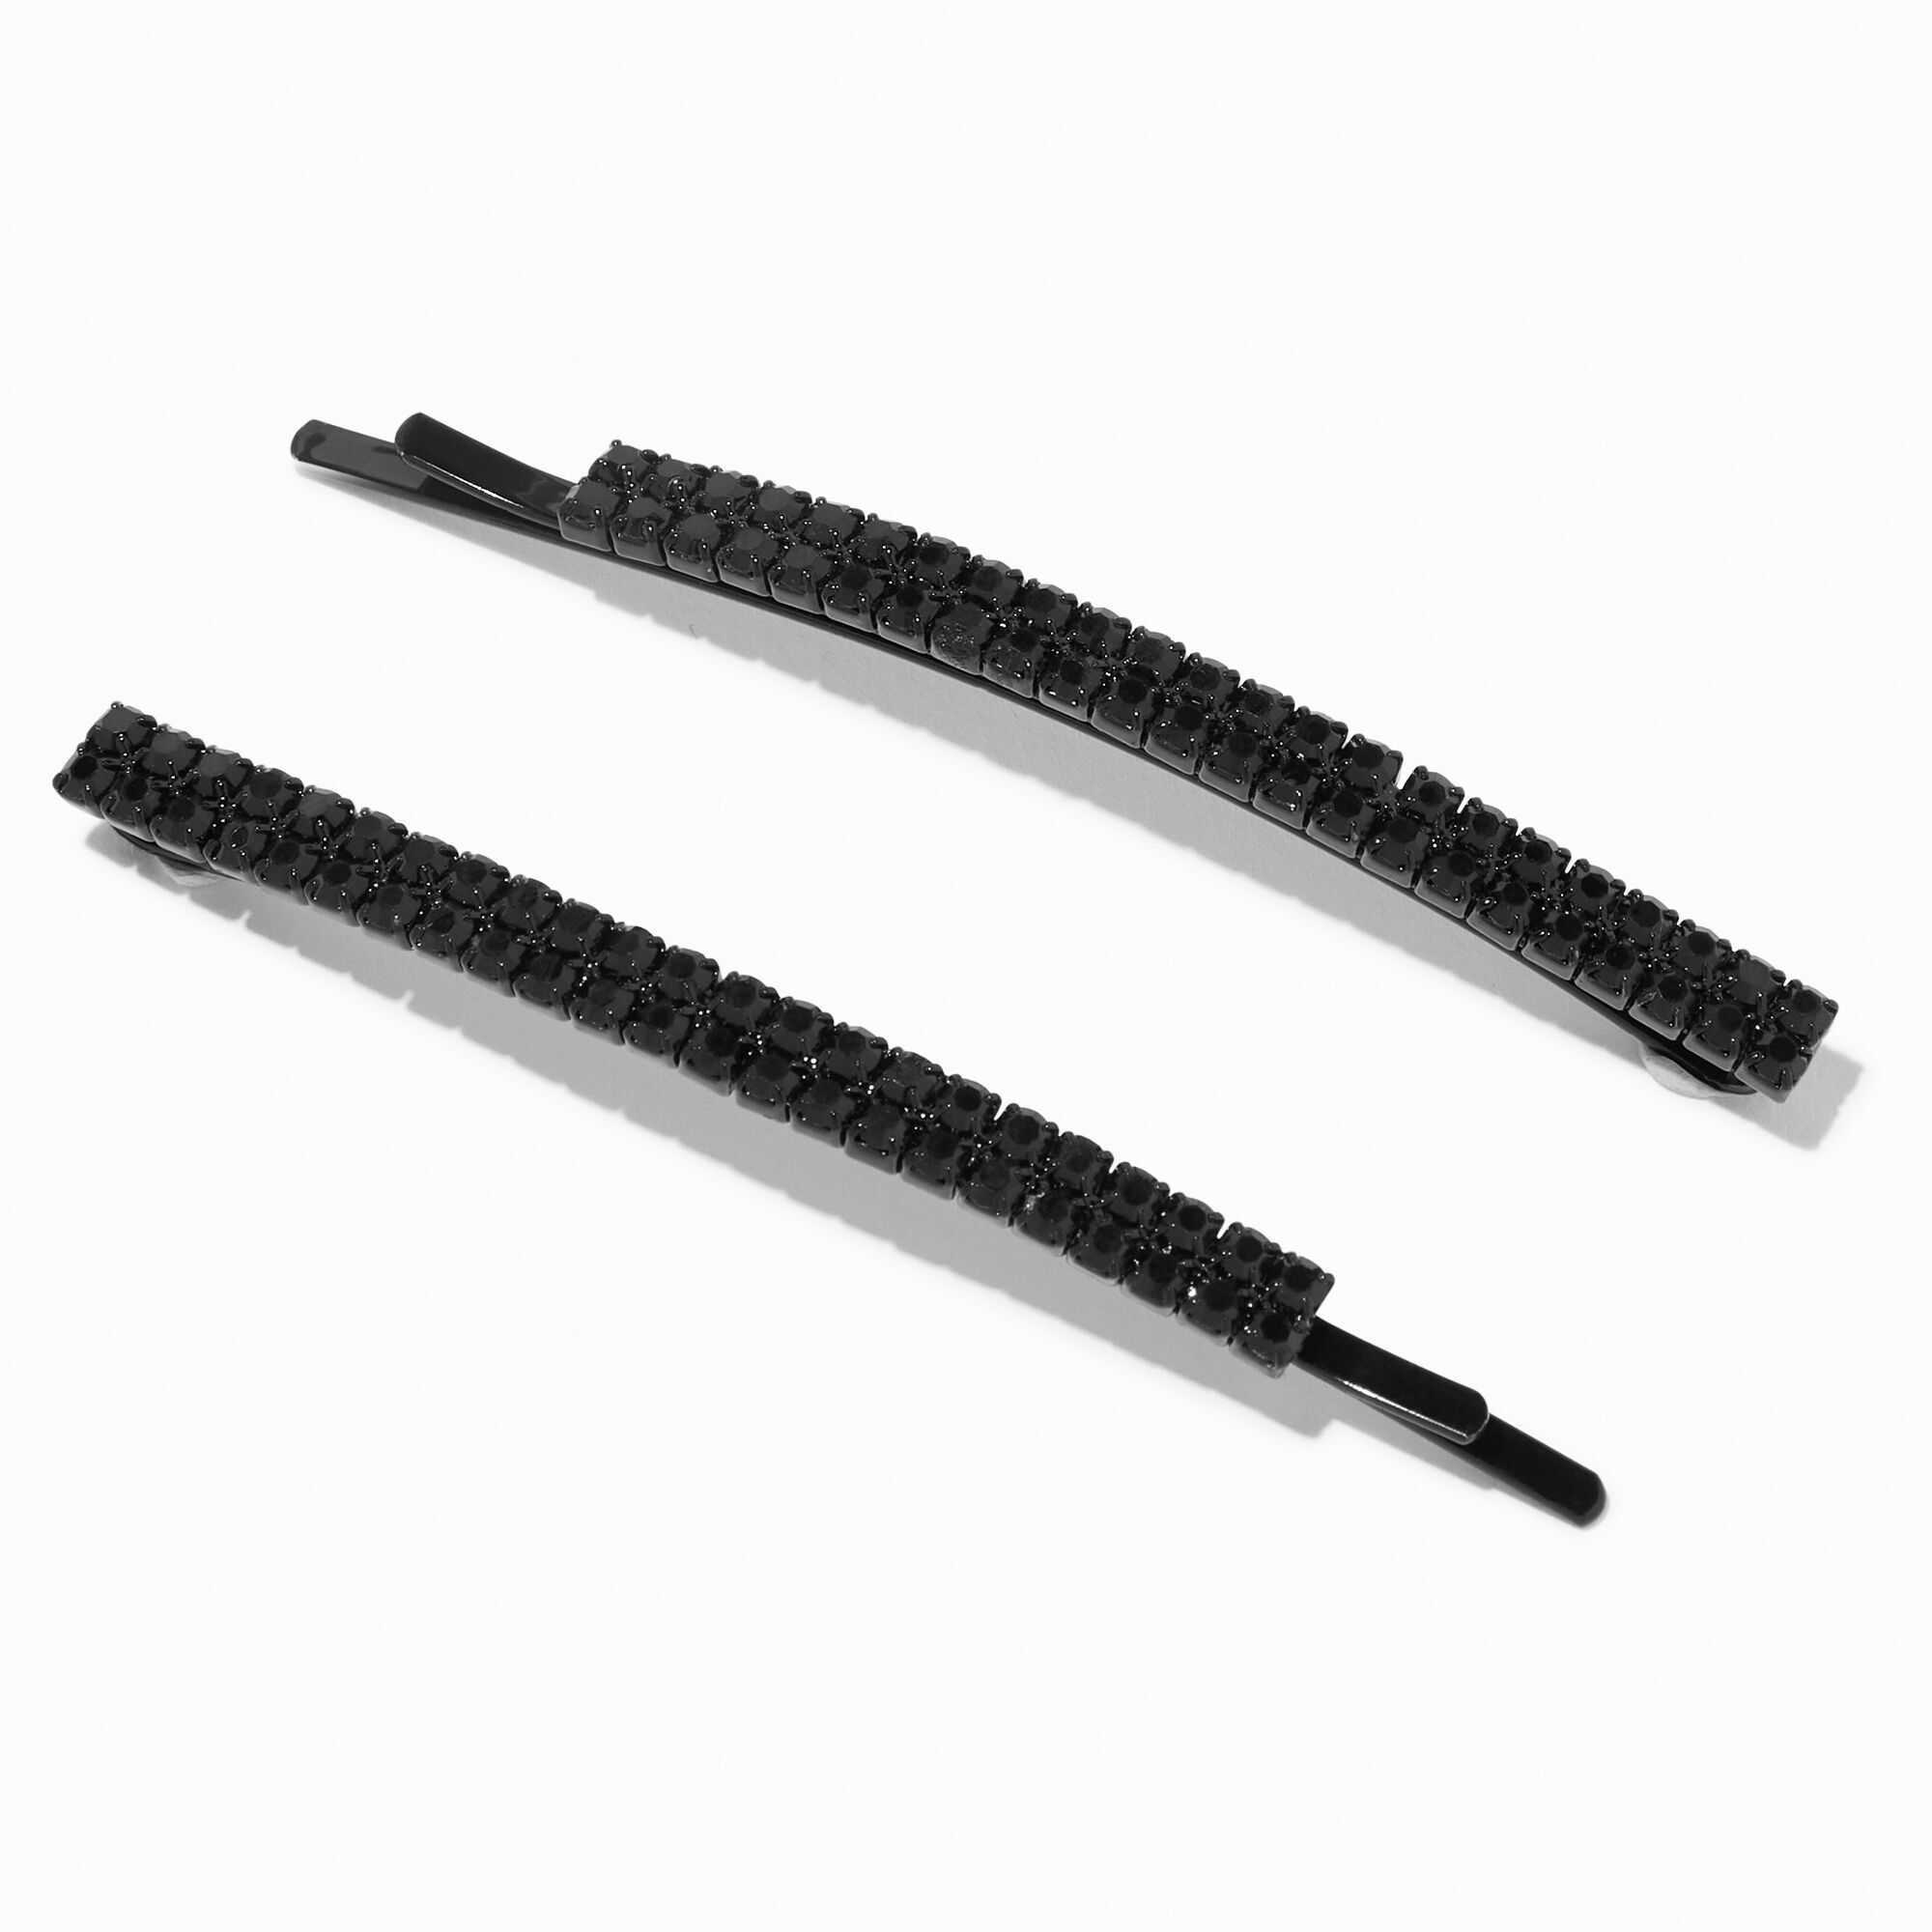 View Claires Rhinestone Bobby Pins 2 Pack Black information